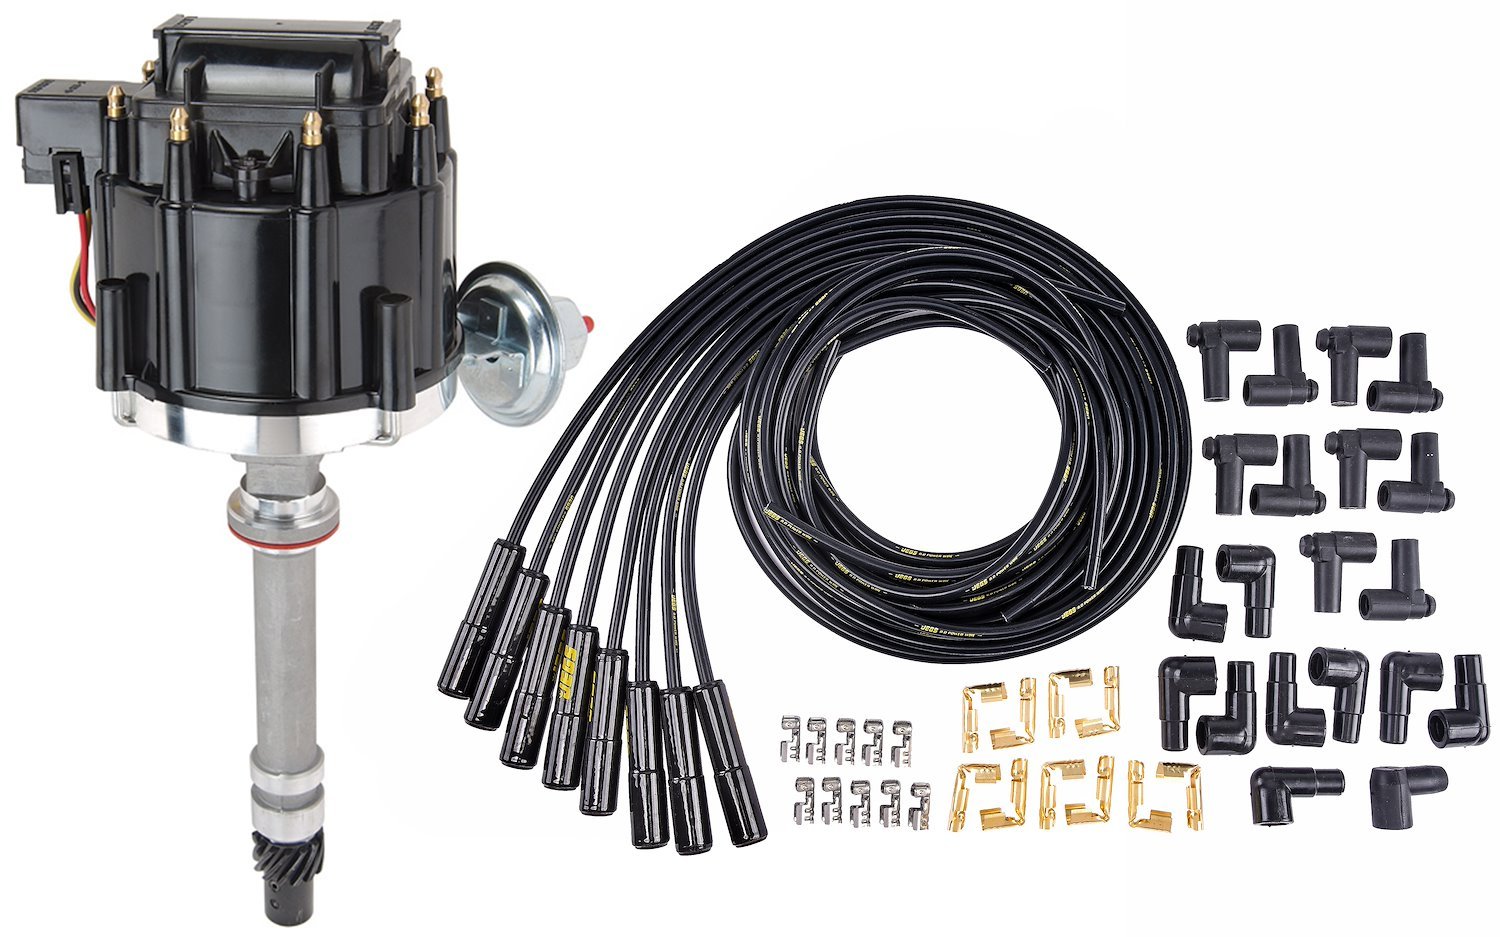 HEI Distributor Kit For Small Block & Big Block Chevy with 8 mm Black HI-Temp Wires & Straight Ceramic Boots